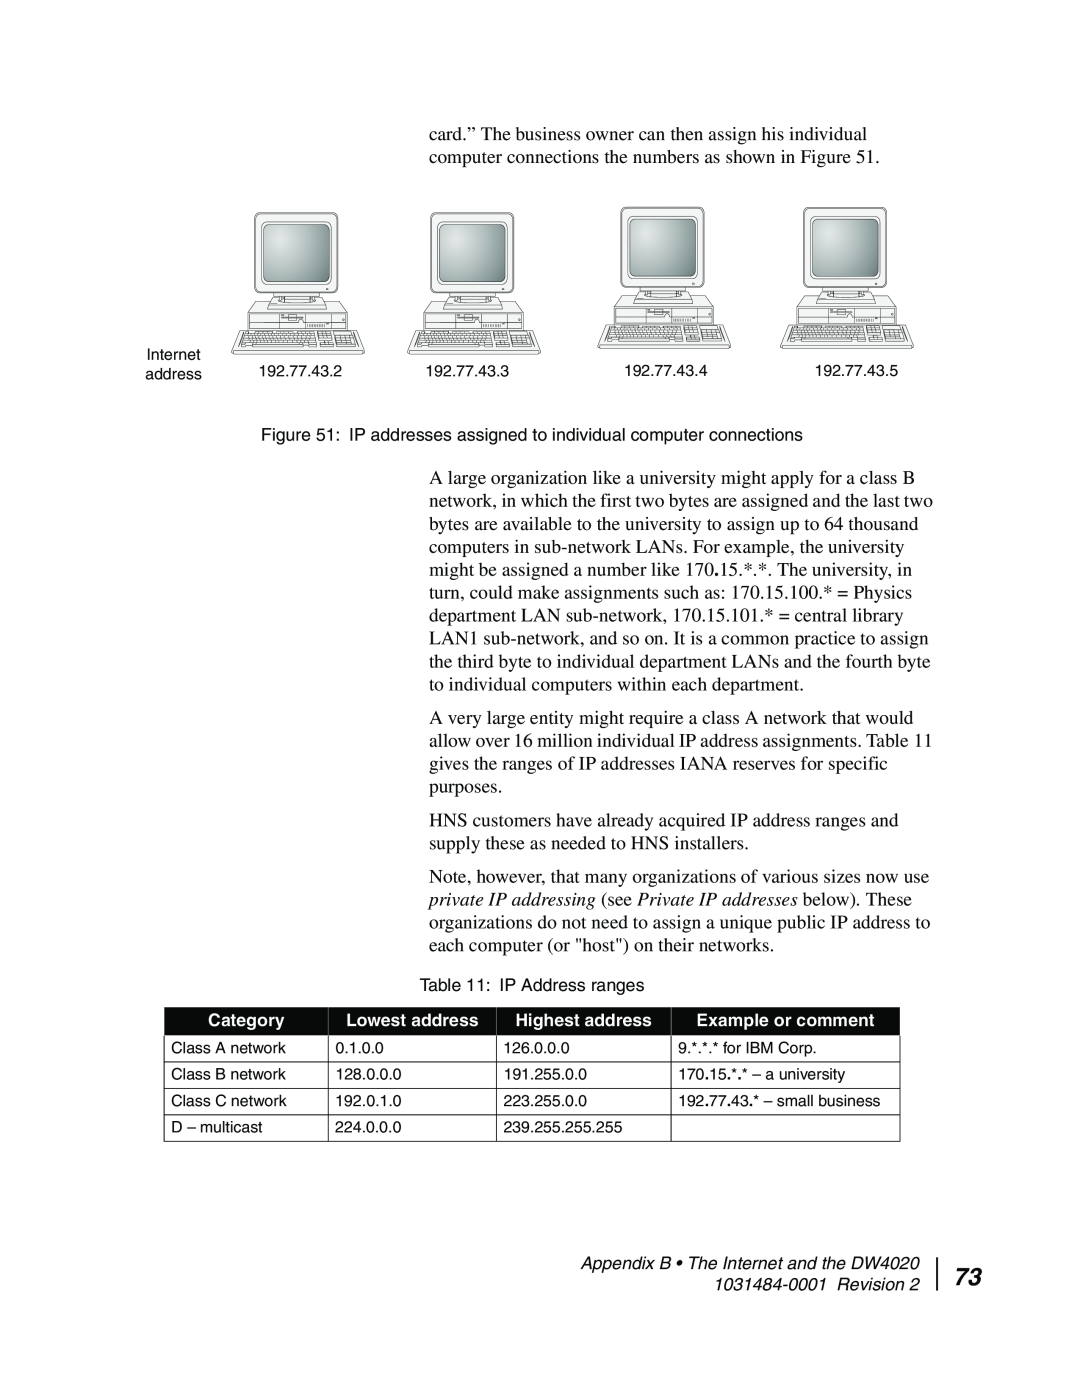 Hughes DW4020 manual IP addresses assigned to individual computer connections, IP Address ranges, Category, Lowest address 